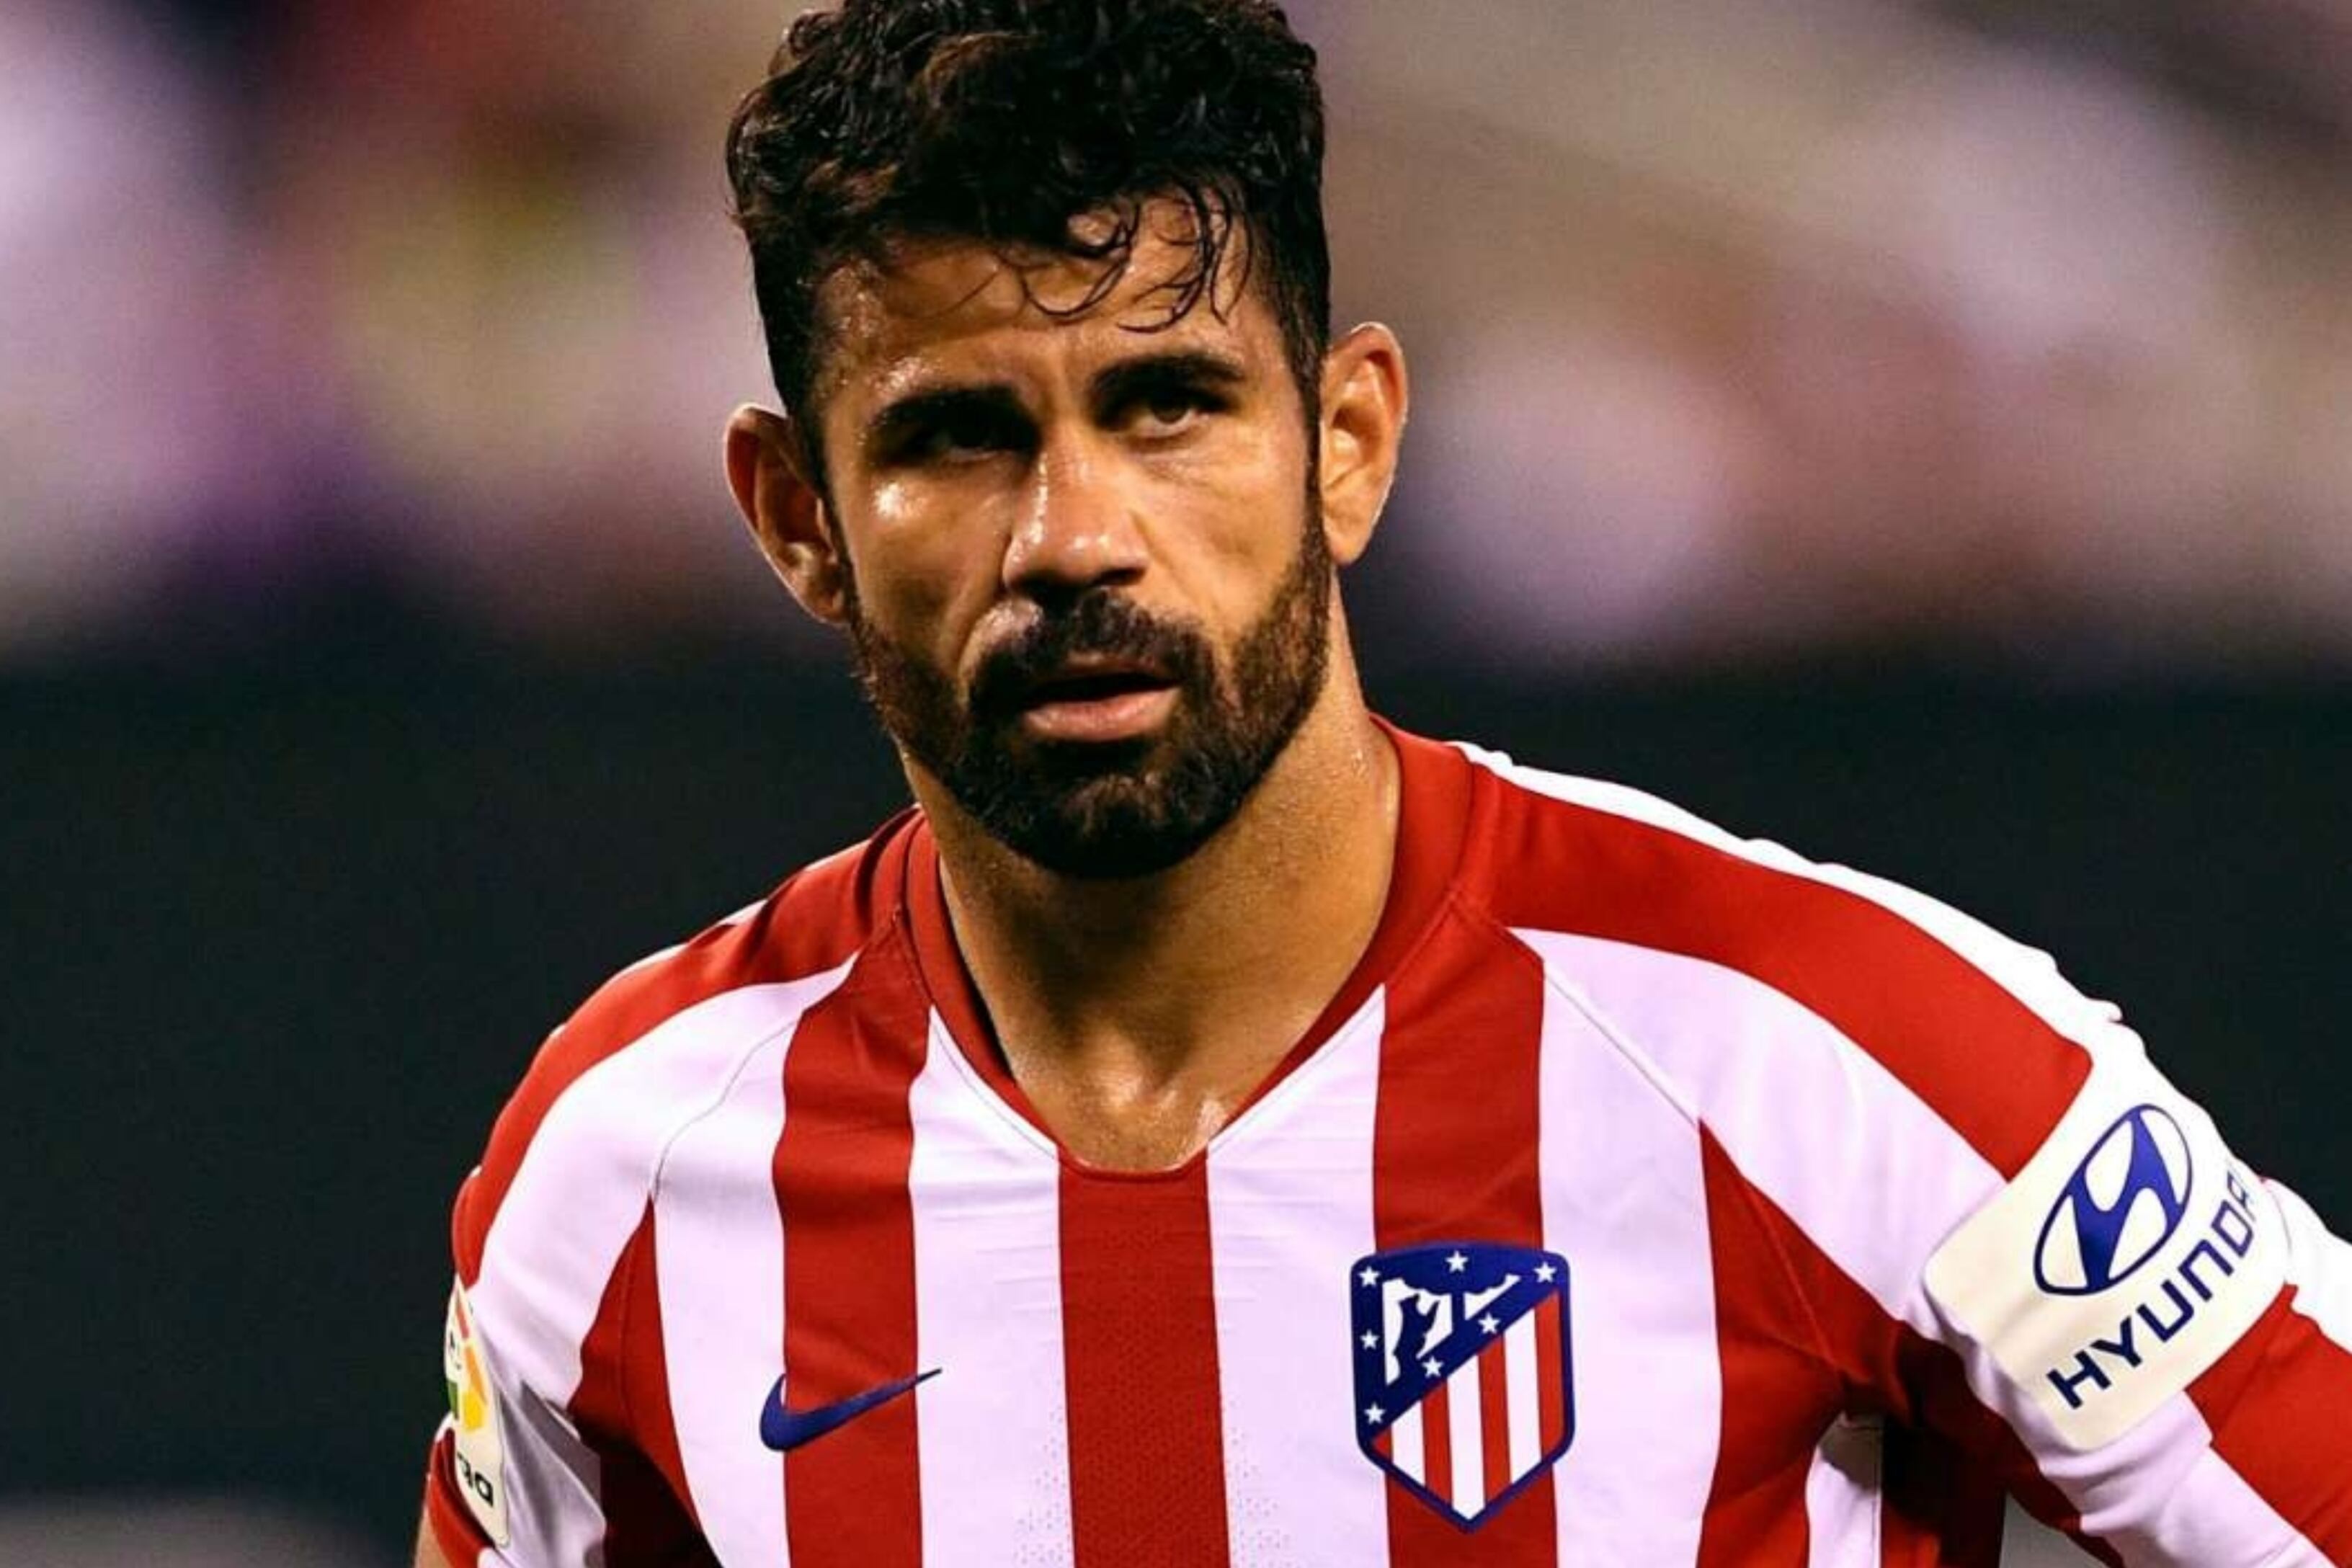 Diego Costa would be back in his favorite league earning this fortune